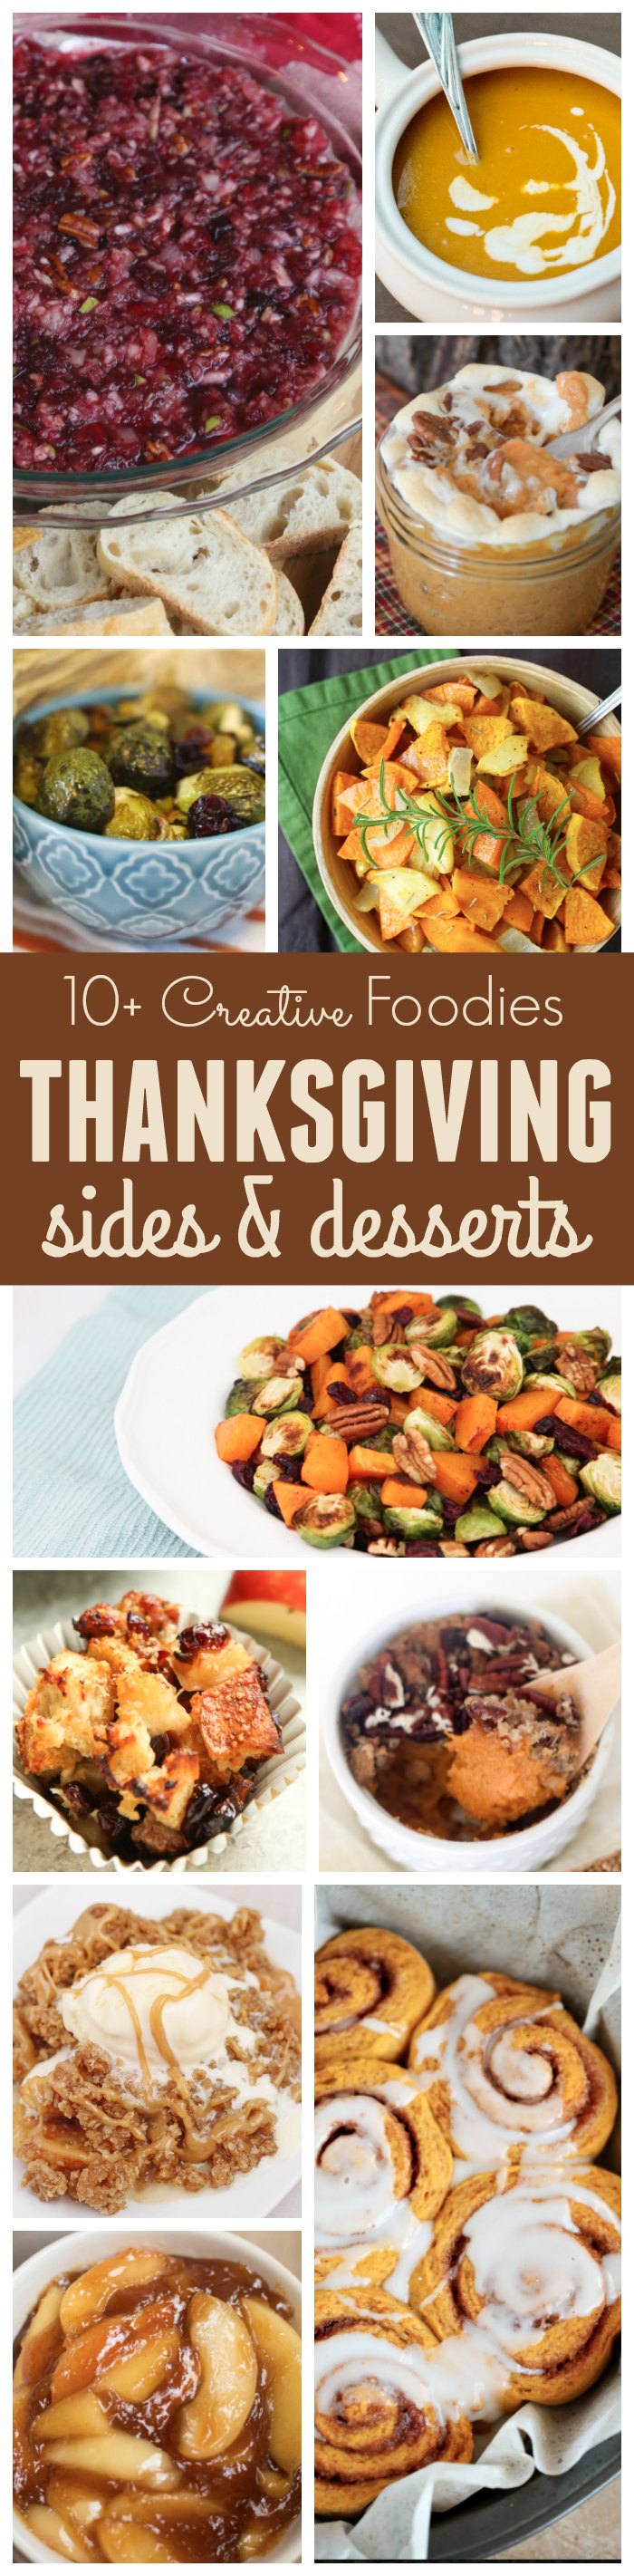 Delicious Thanksgiving Side Dishes!